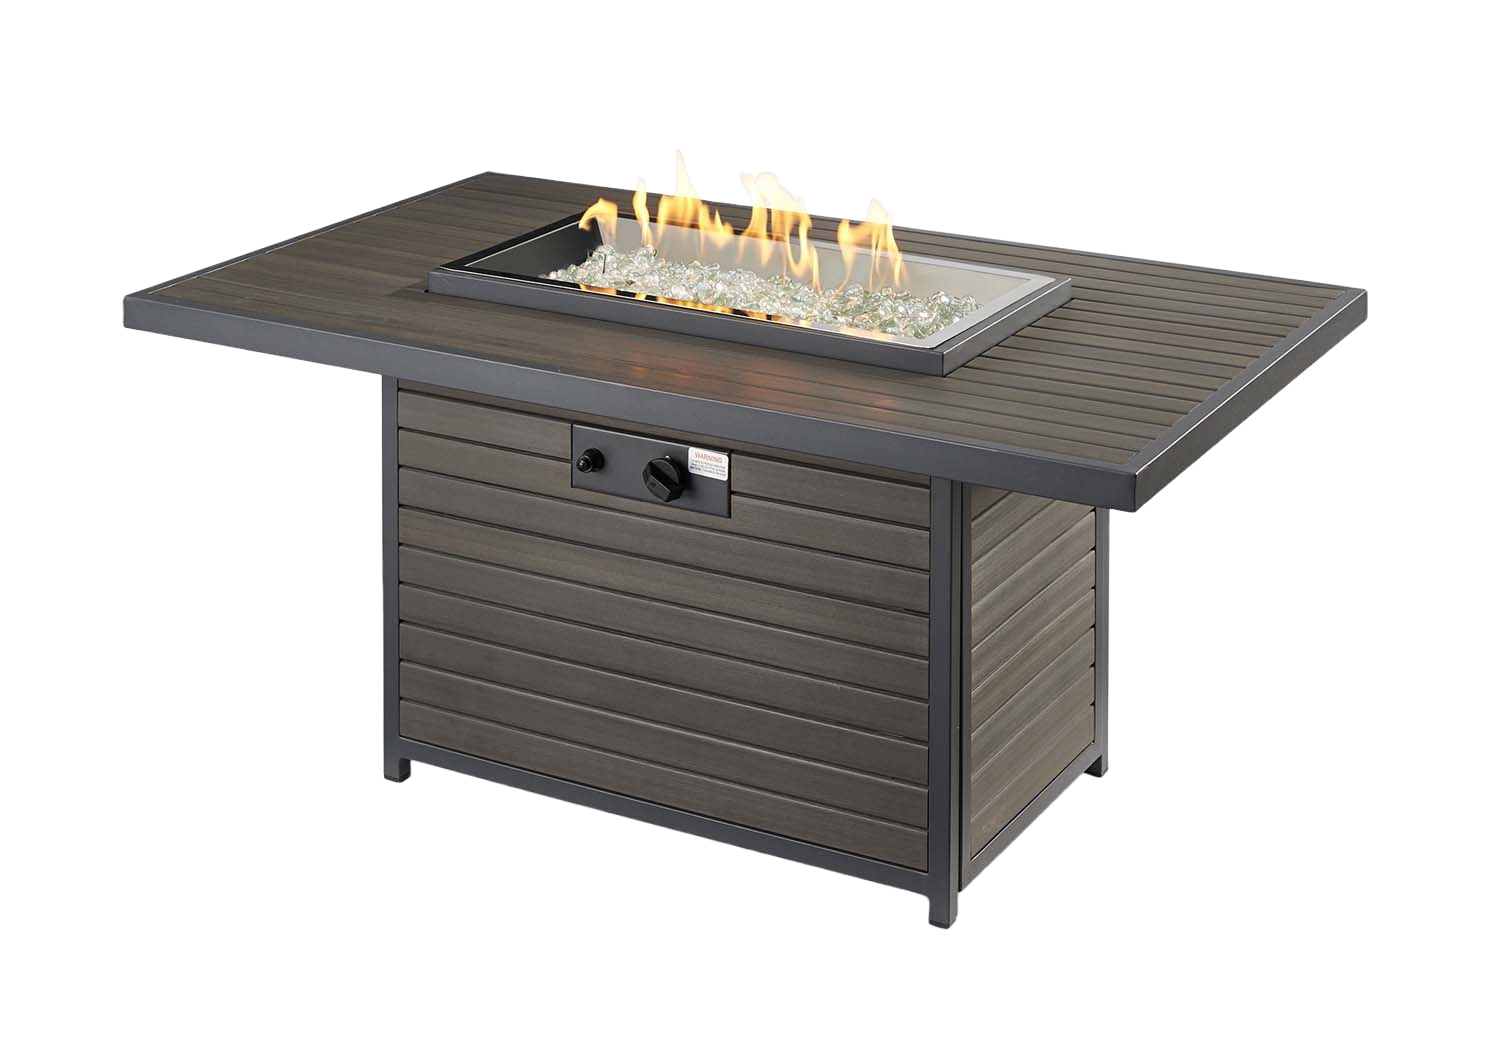 Outdoor GreatRoom Company "Brooks" close-up with flames lit